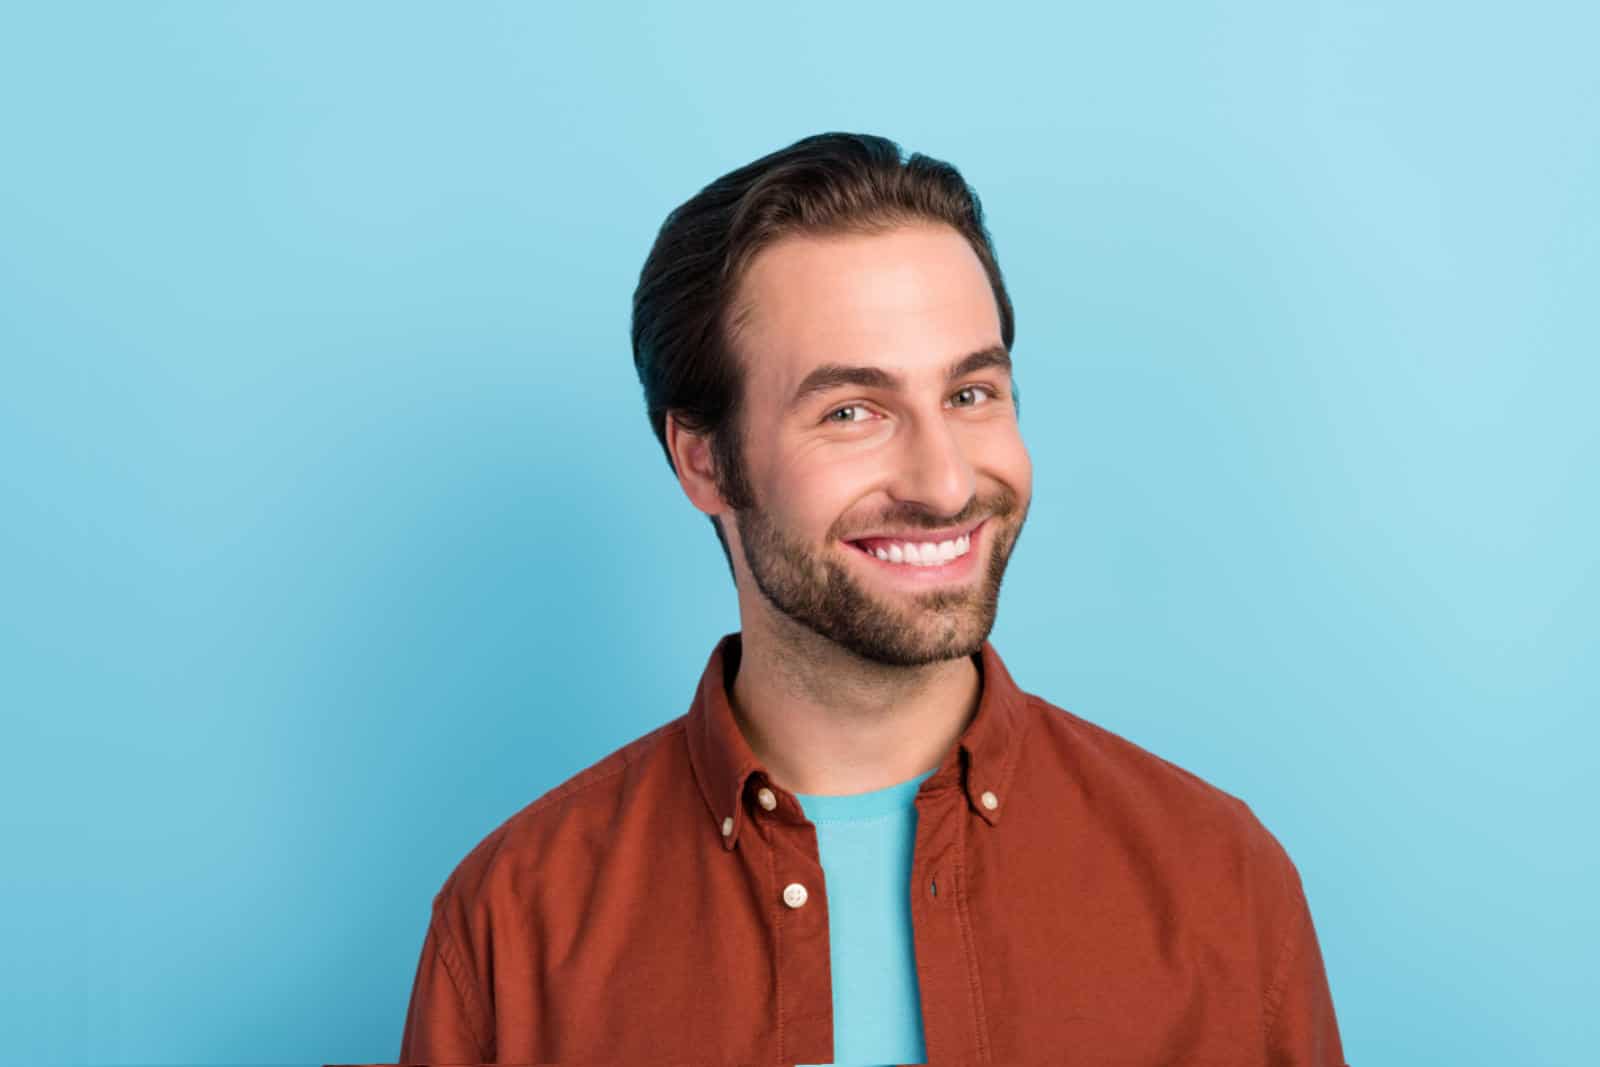 A handsome man smiles at the camera in front of a light blue background.